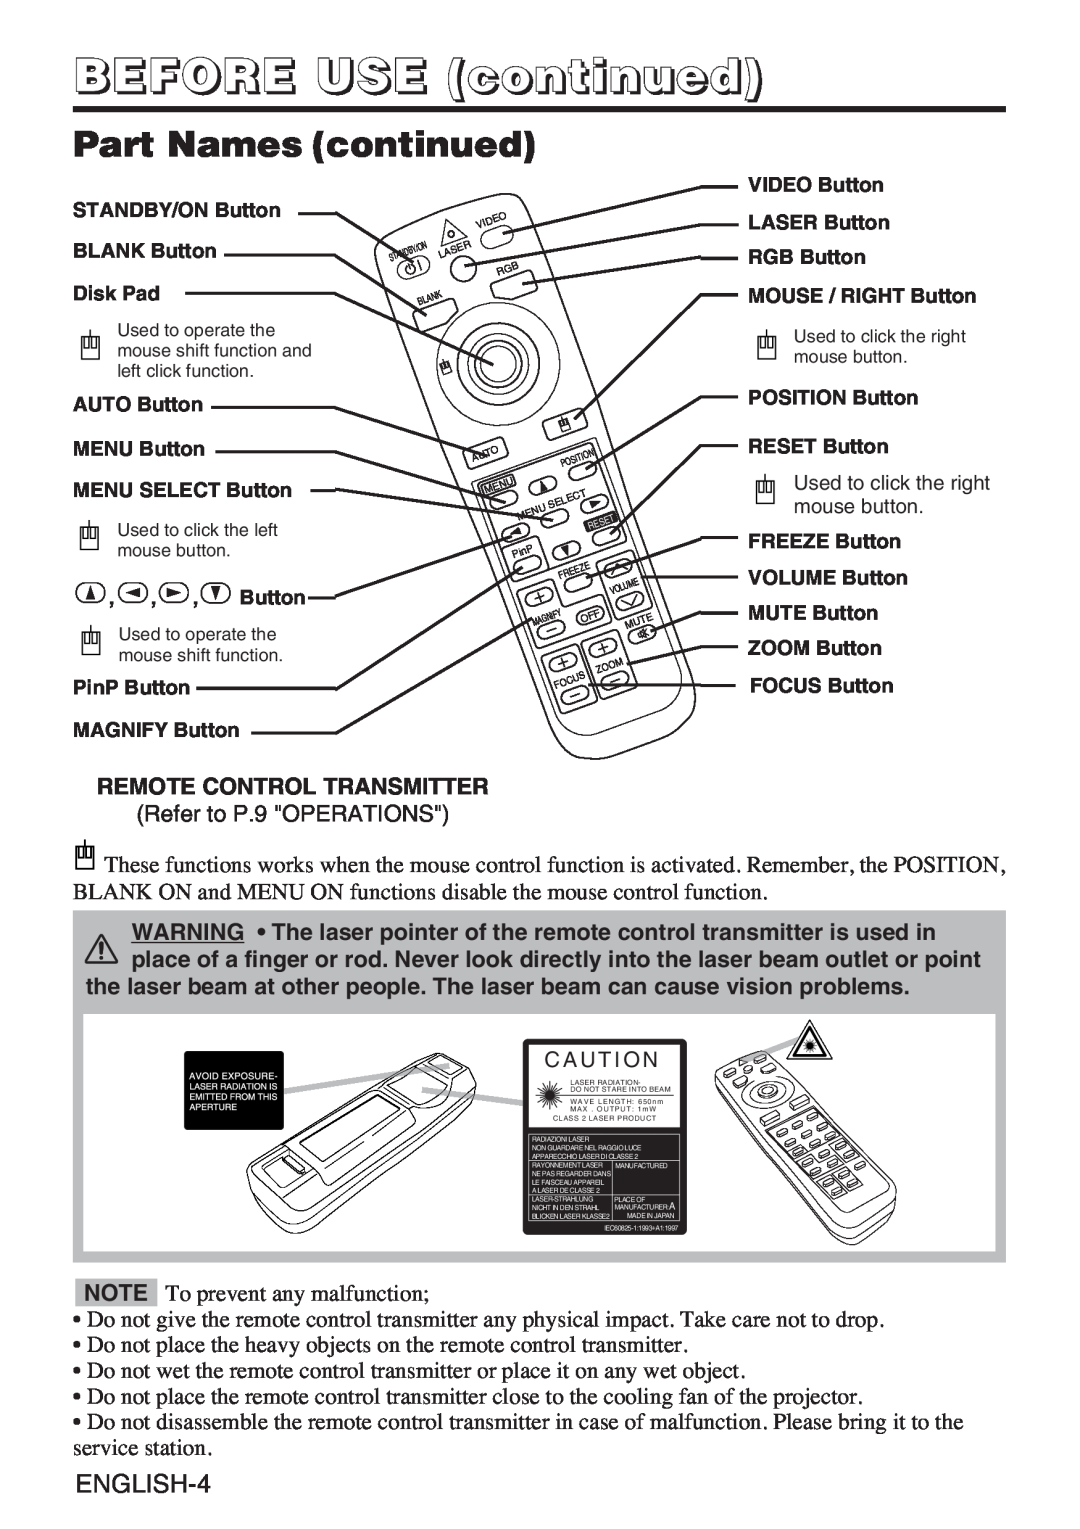 InFocus liquid crystal user manual Part Names continued, ENGLISH-4, BEFORE USE continued 